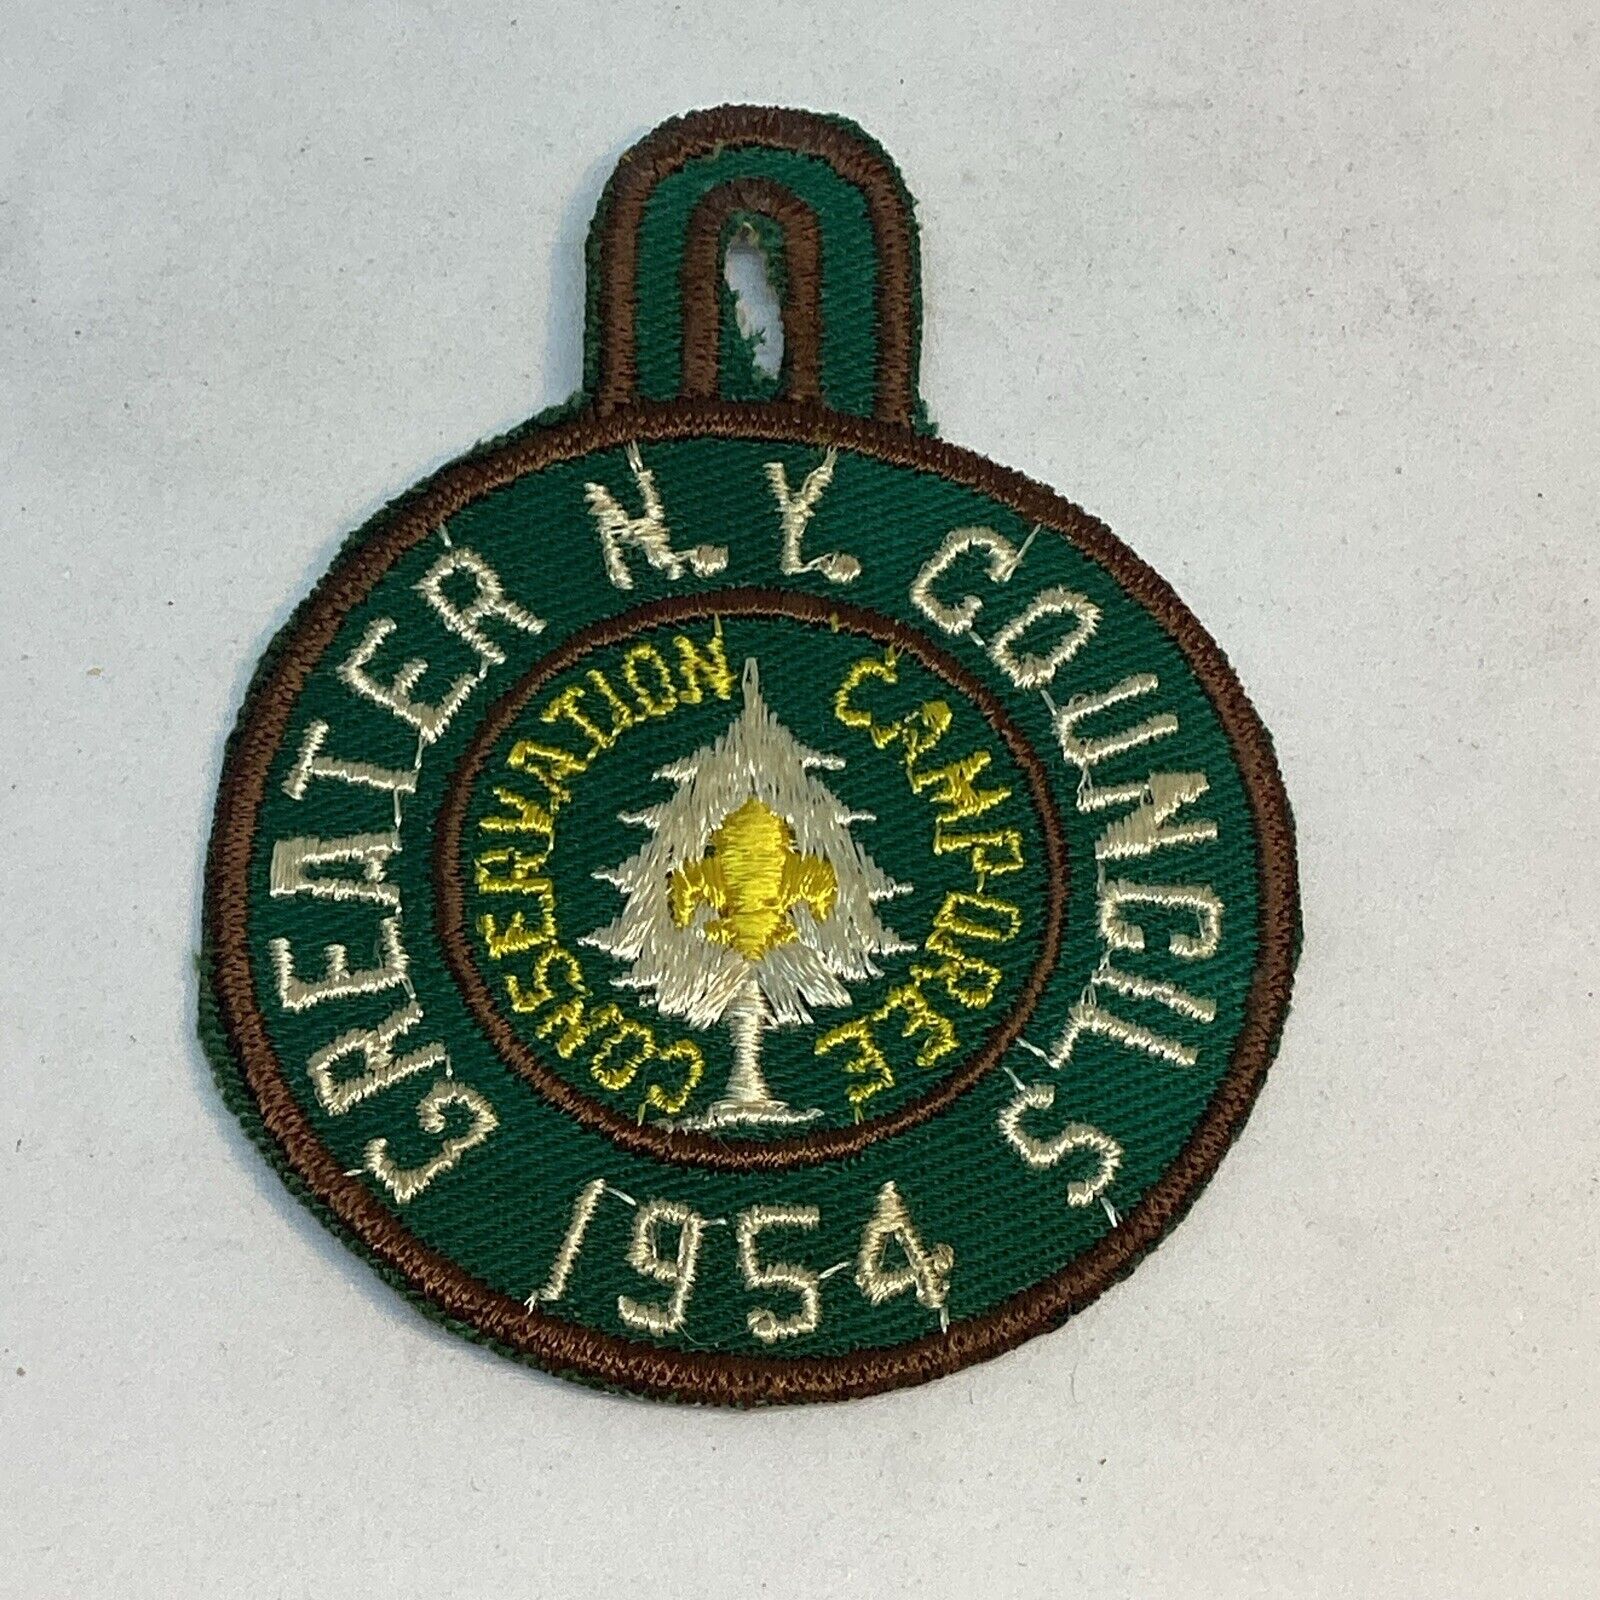 Vintage 1954 Boy Scouts Greater New York Councils Camporee Conservation Patch